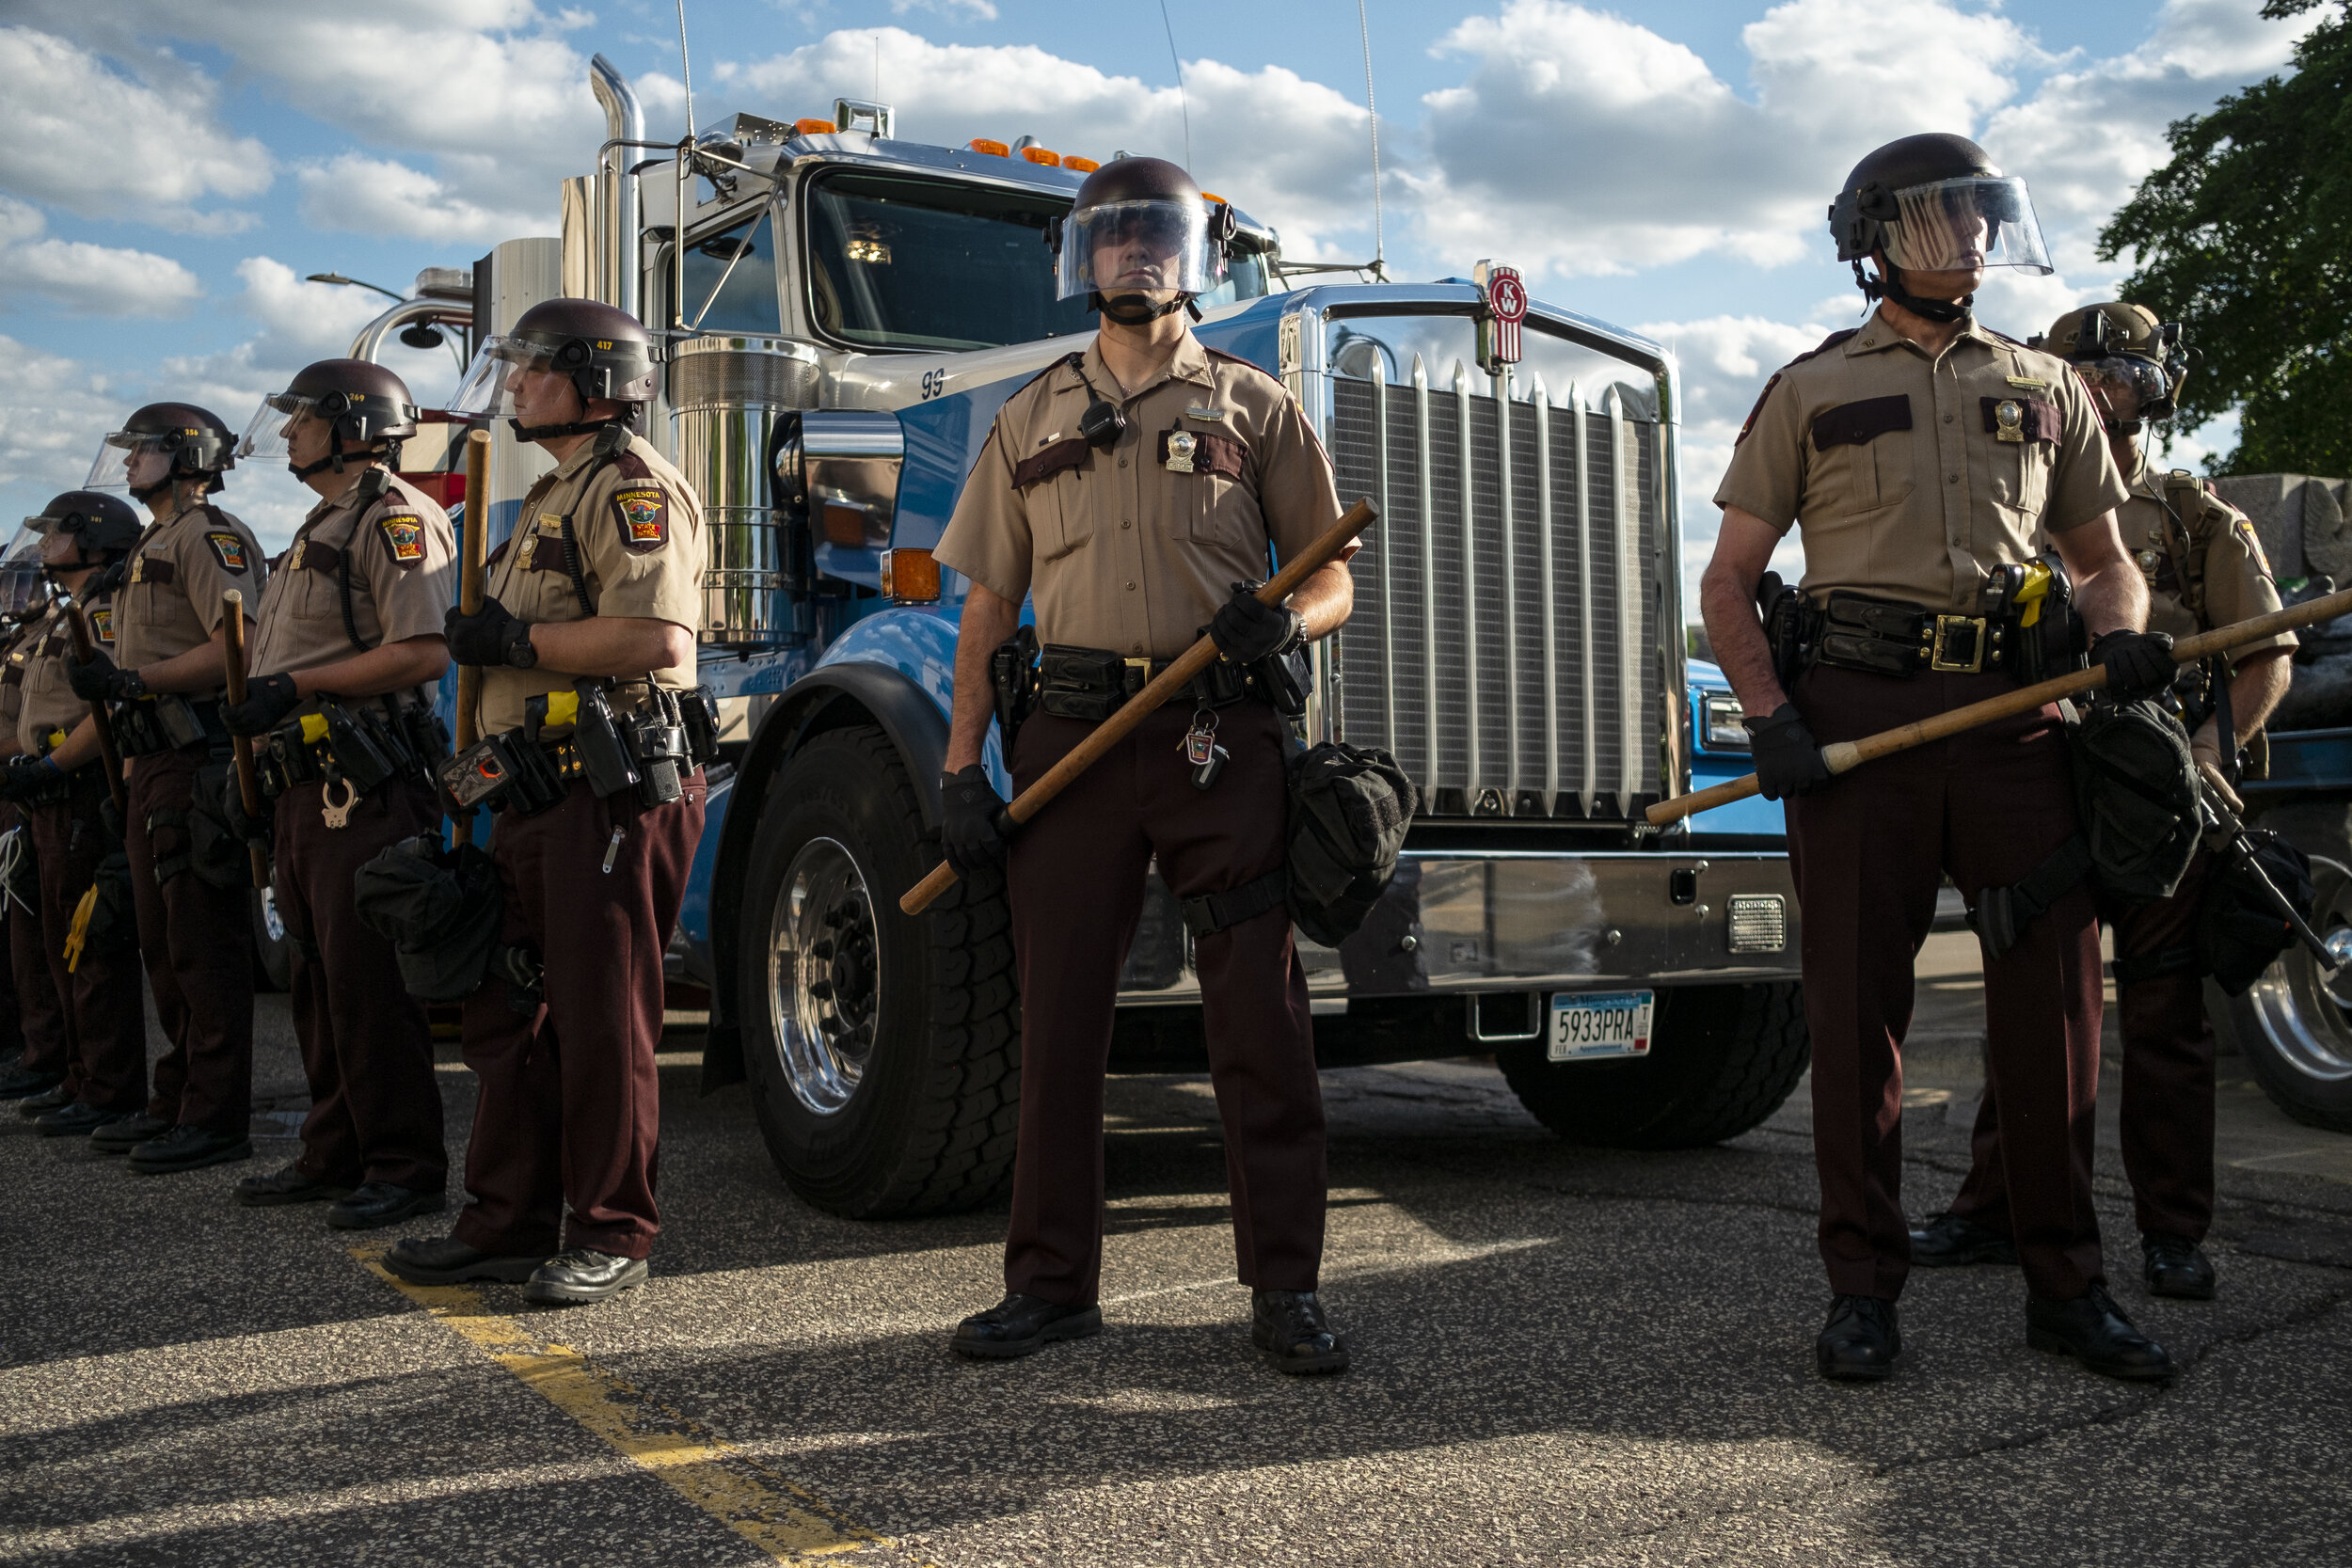  State troopers guard the semi ordered to remove the newly toppled statue of Christopher Columbus at the Minnesota State Capitol on Wednesday, June 10th, 2020. On the other side of the street a protest was organized by the American Indian Movement (A